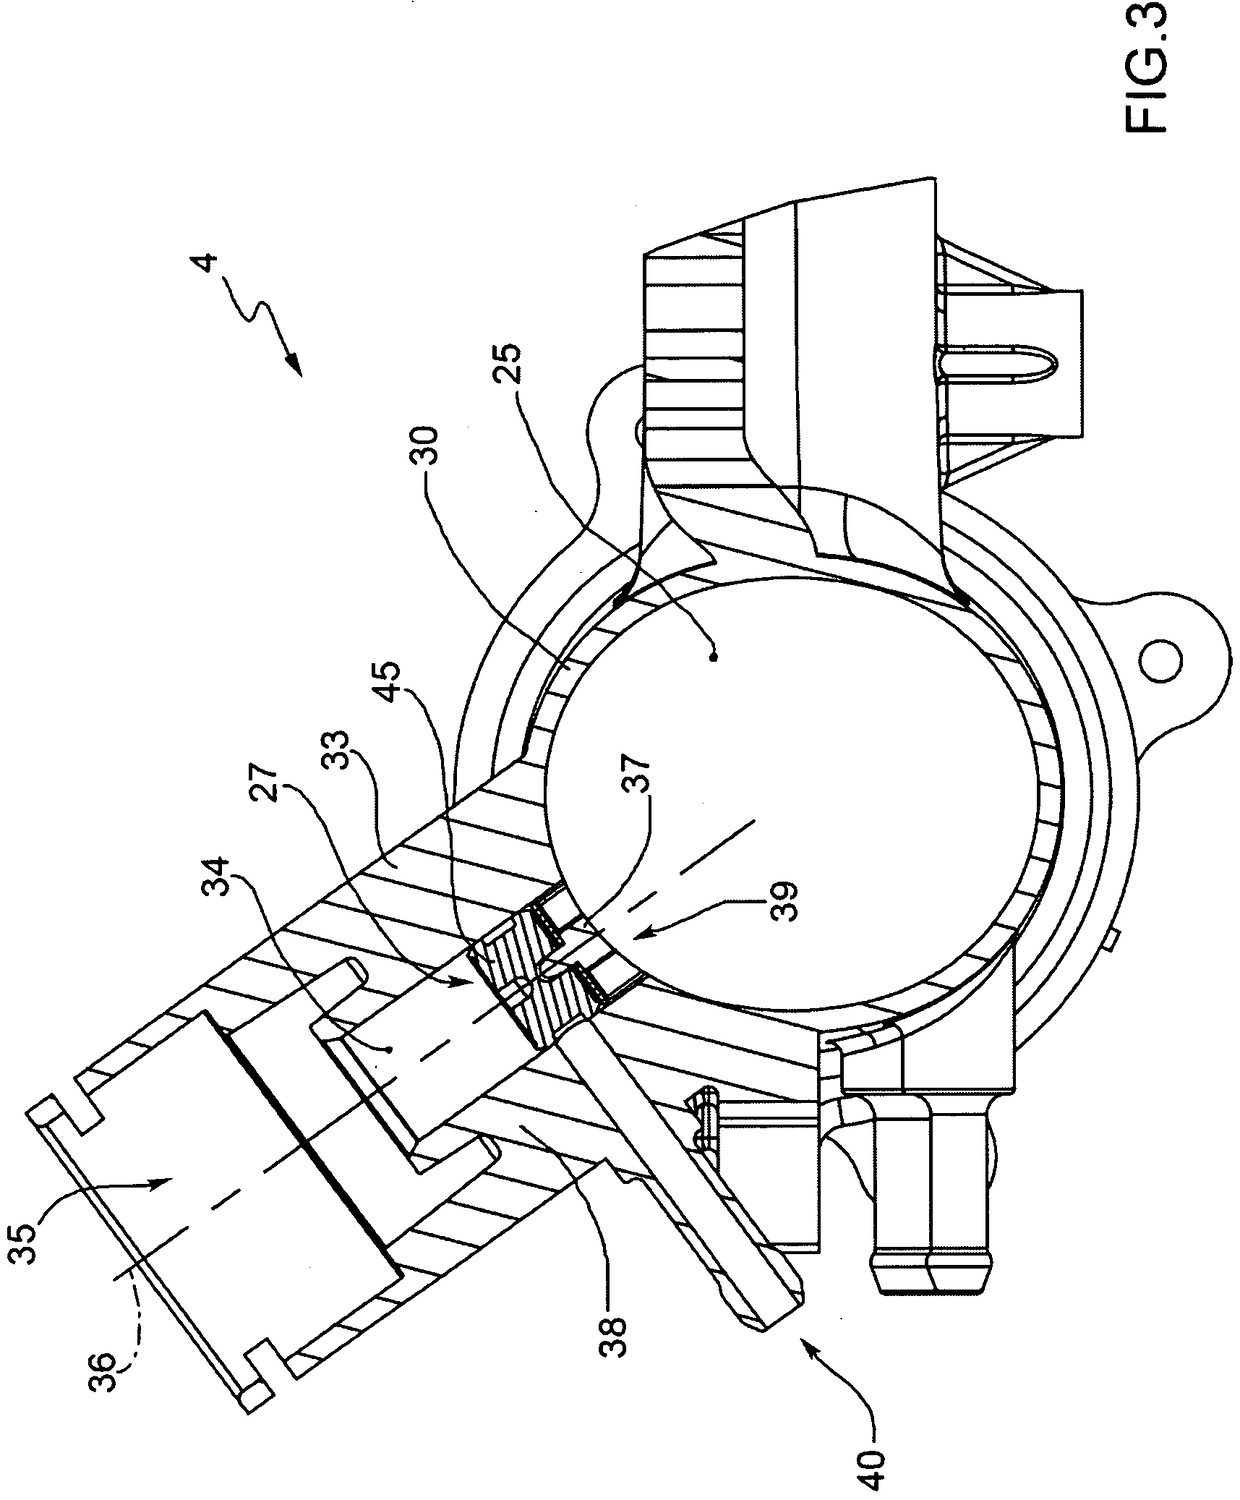 Intake manifold with integrated canister circuit for a supercharged internal combustion engine